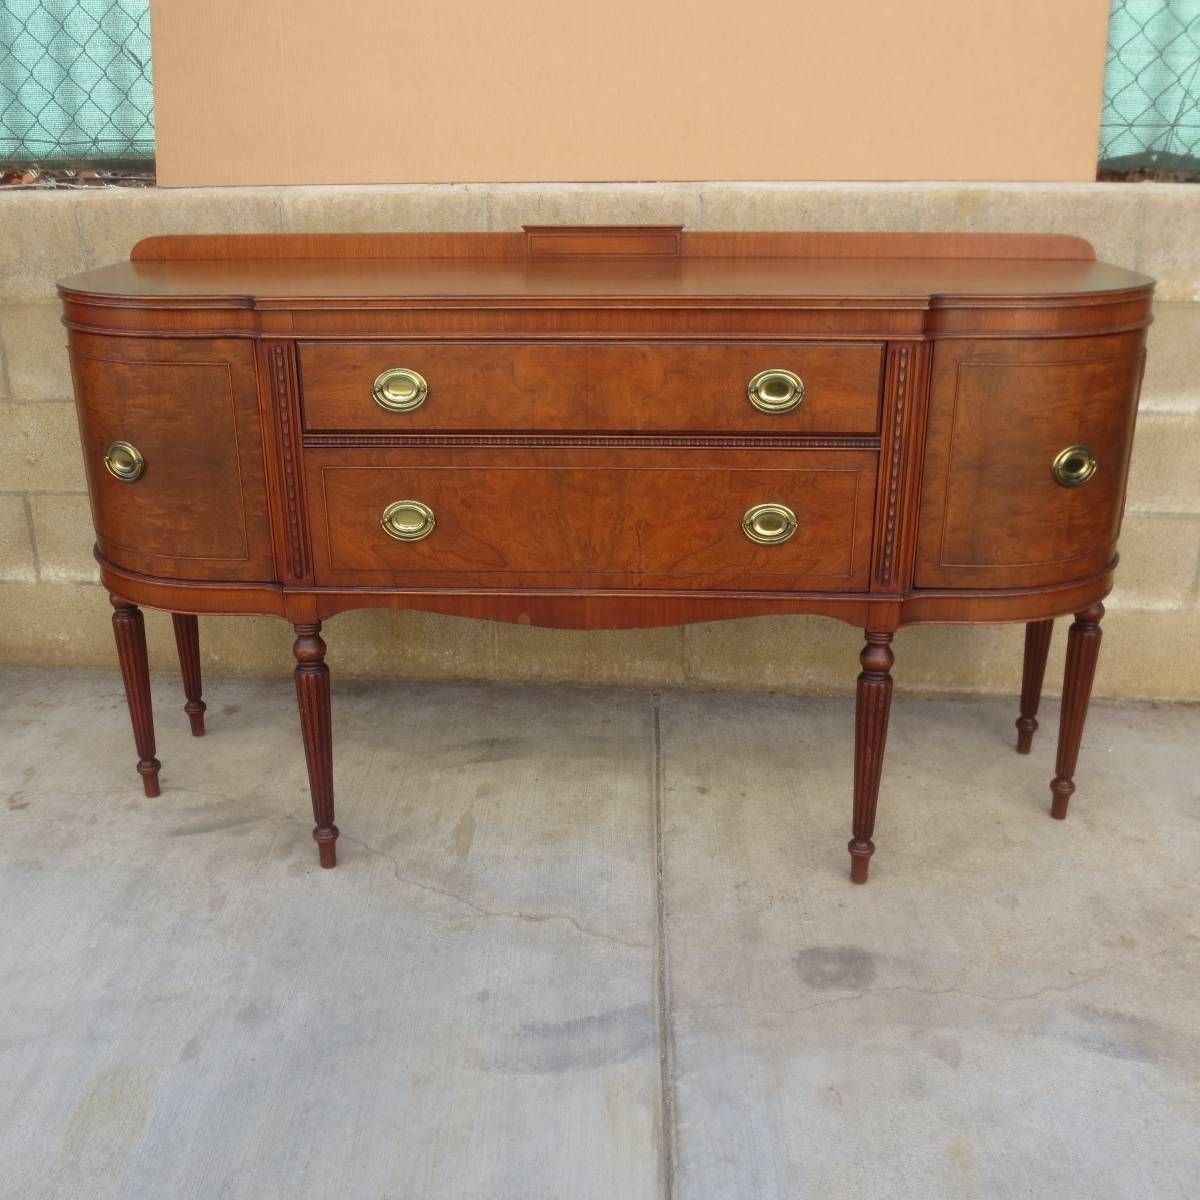 Antique Sideboards And Antique Servers From Antique Furniture Mart With Sideboards For Sale (View 18 of 30)